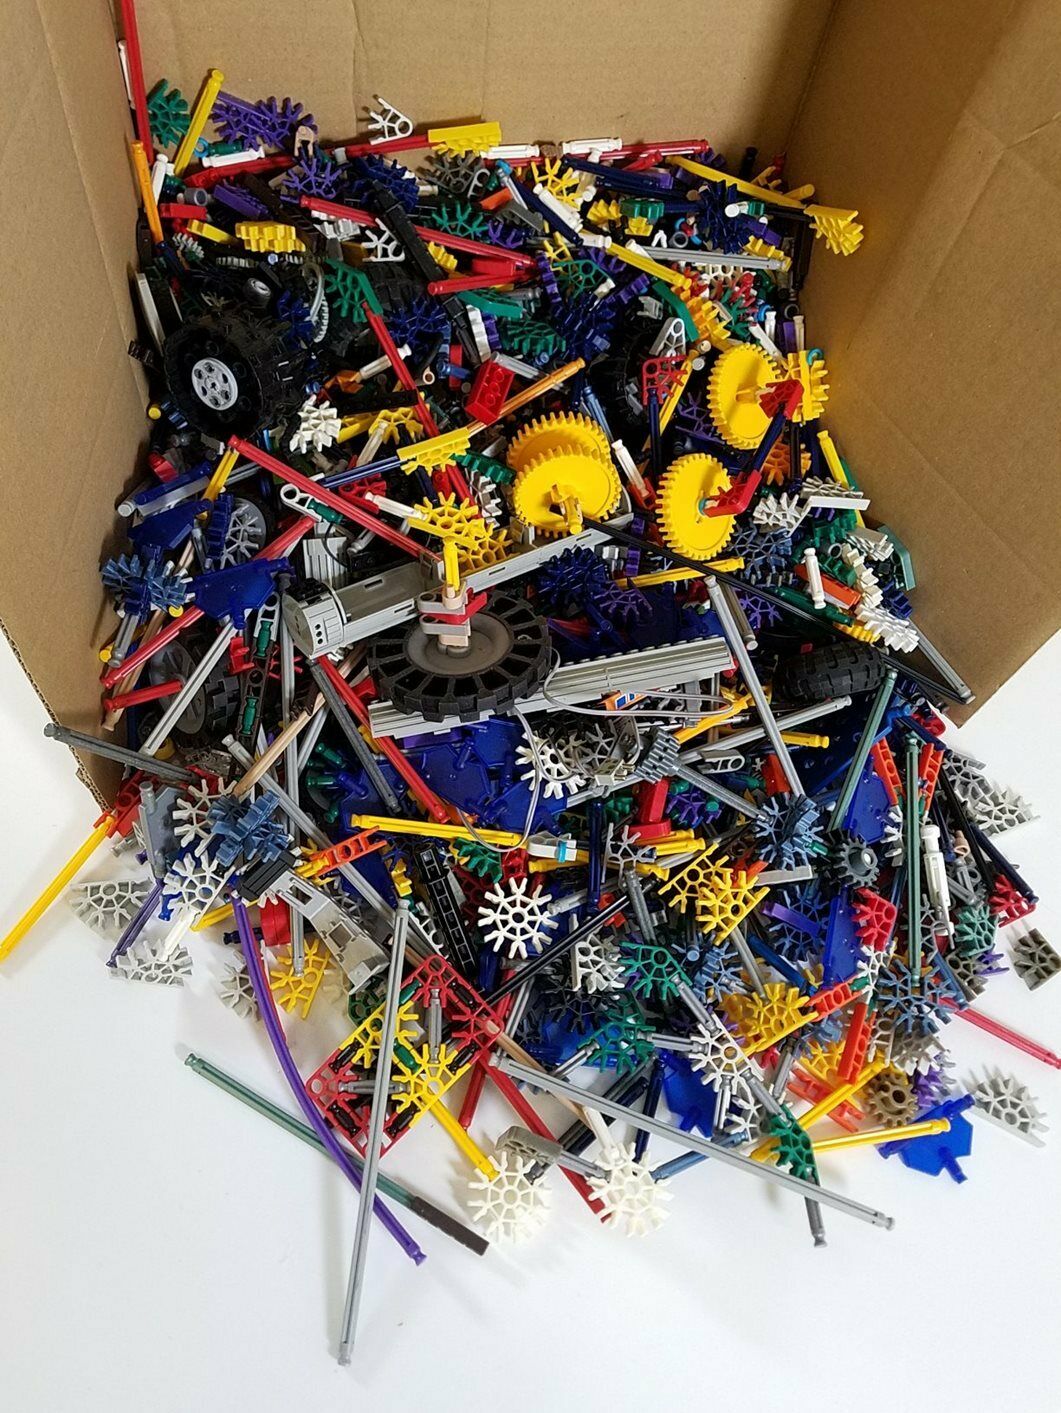 10.5+ Lbs Of Assorted K’nex Building Pieces, Toys, & Accessories -lot